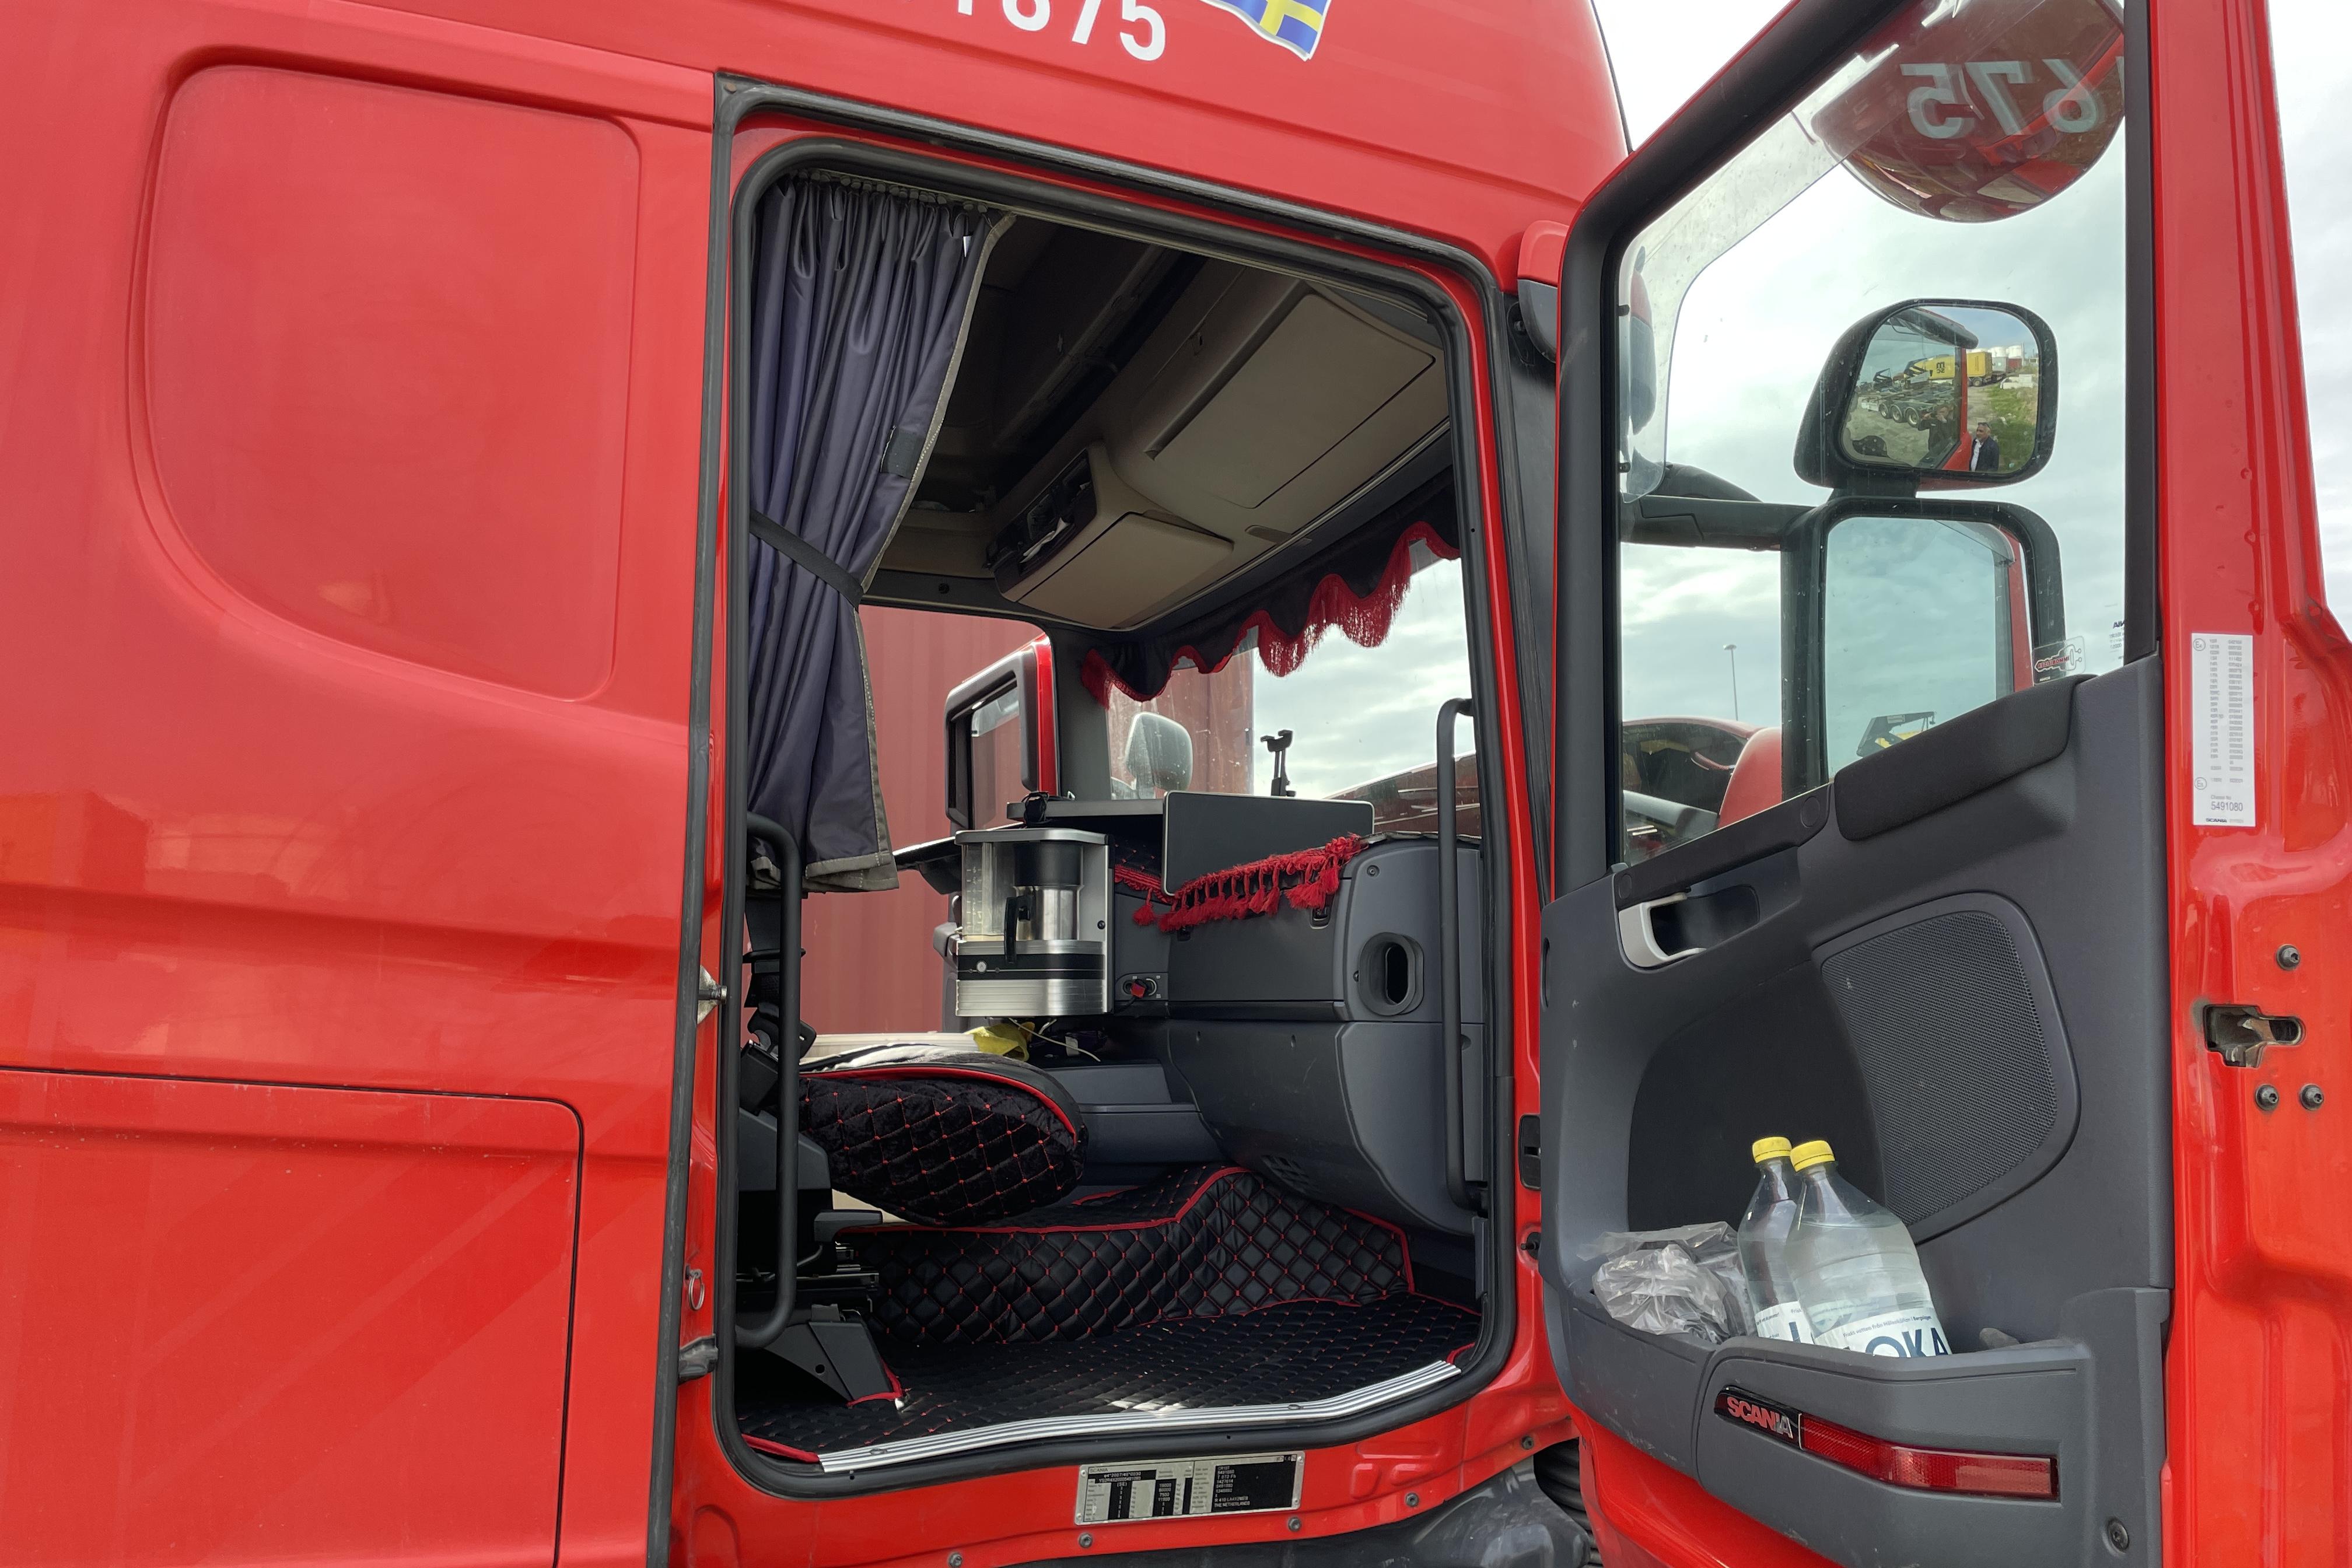 Scania R410 - 564 816 km - Automatic - red - 2017